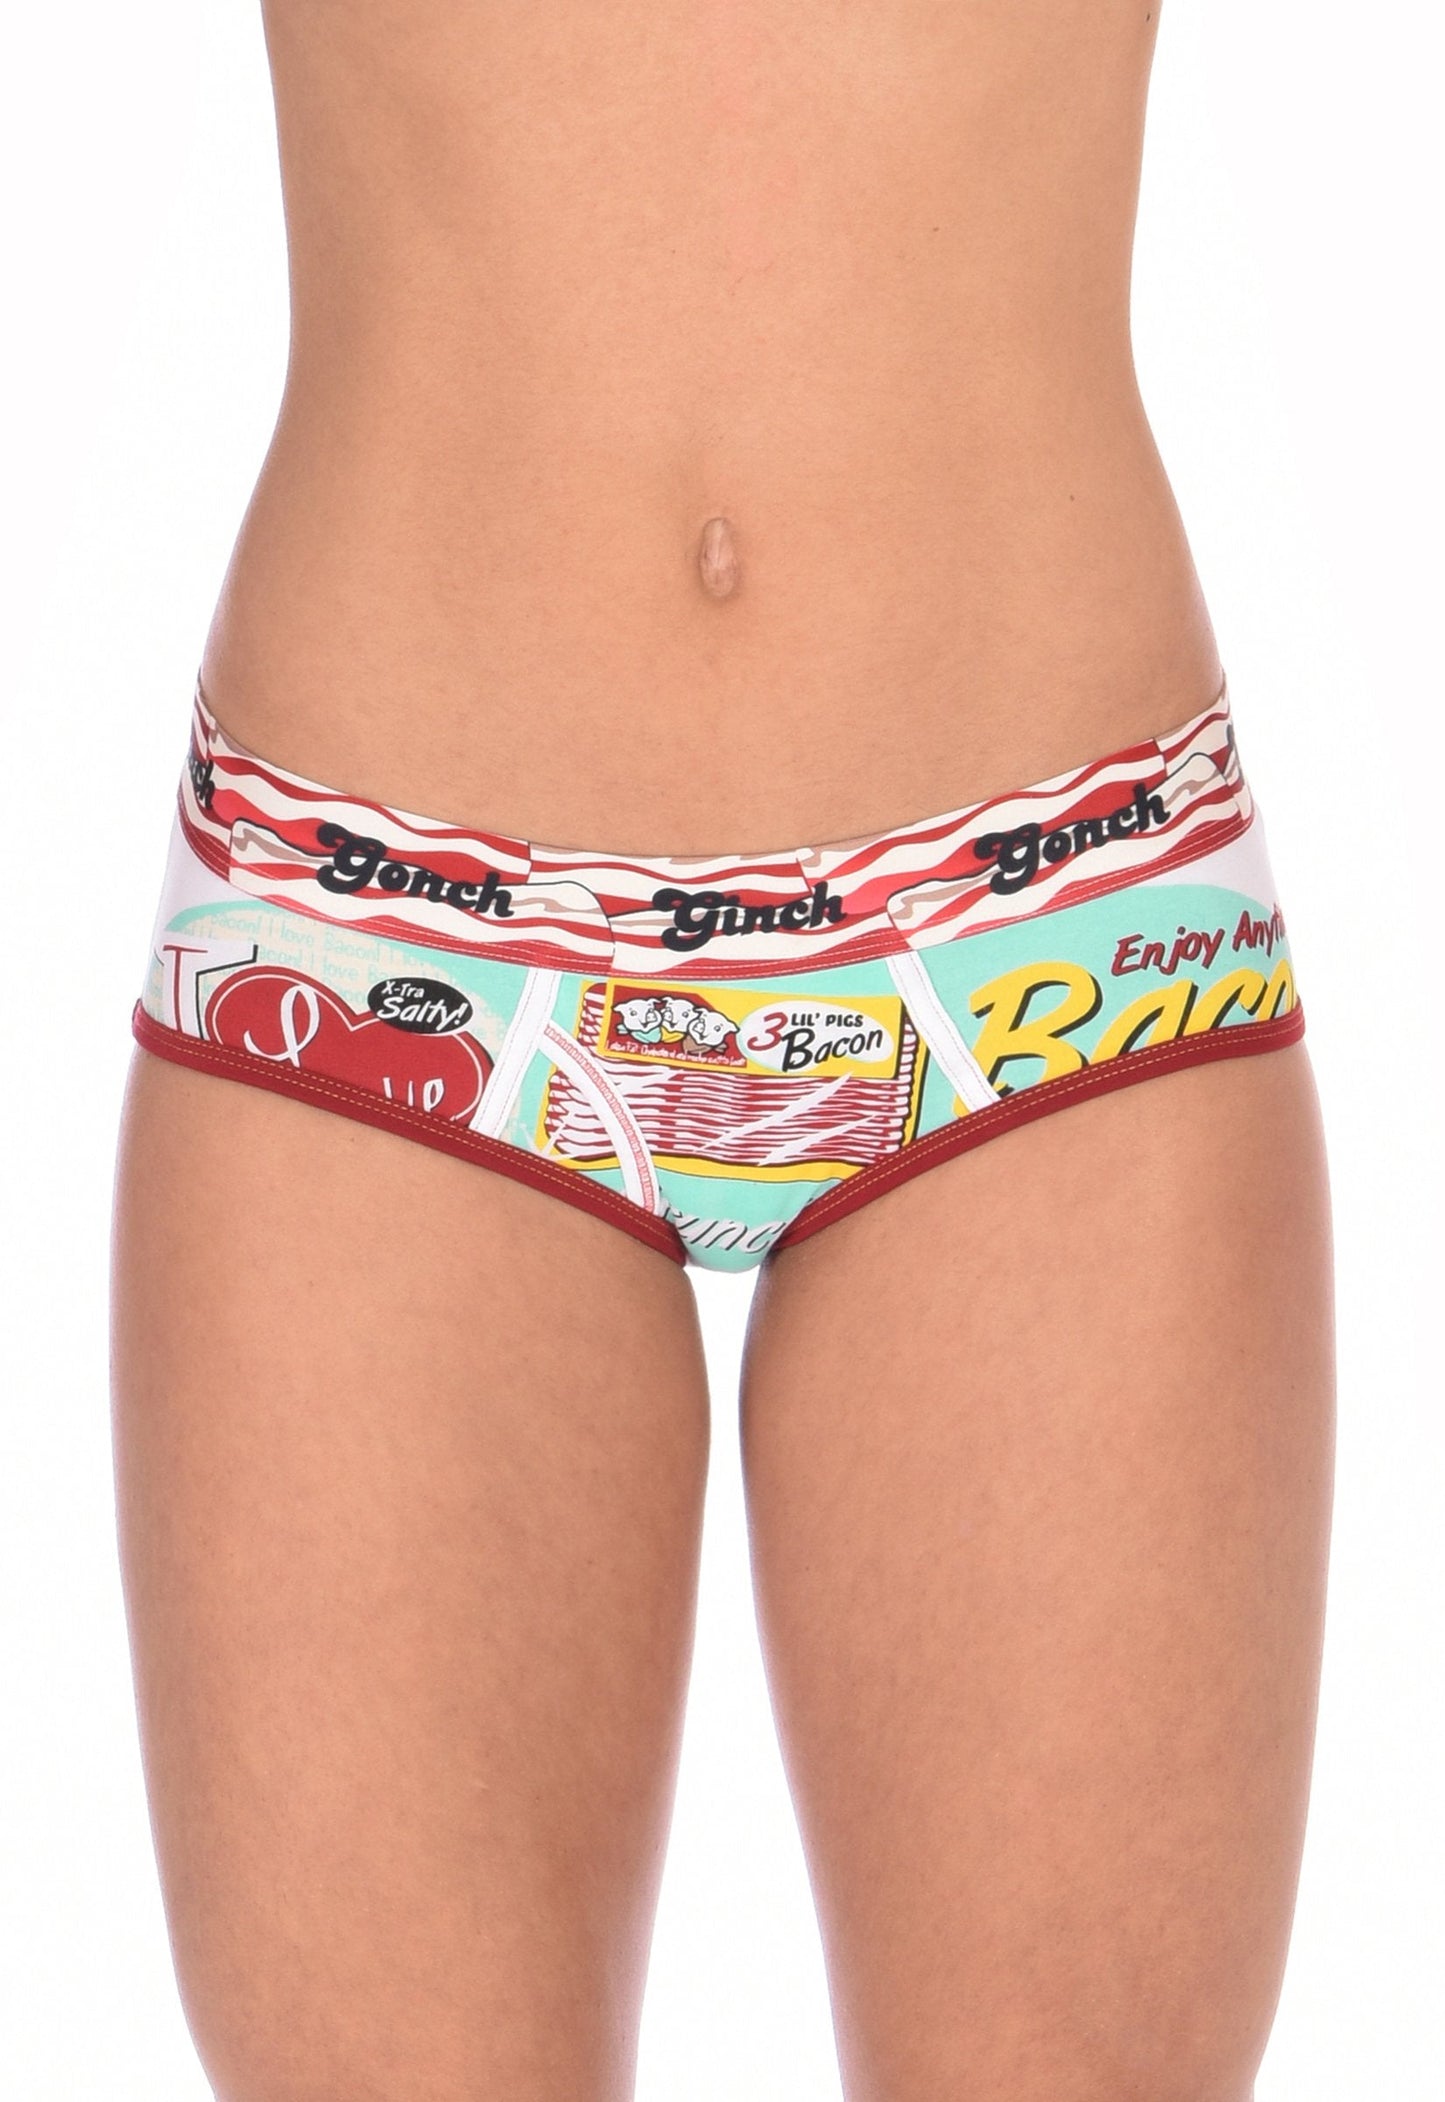 I Love Bacon Brief Ginch Gonch Women's underwear boy cut y front with white teal and red, and bacon detail and waistband front